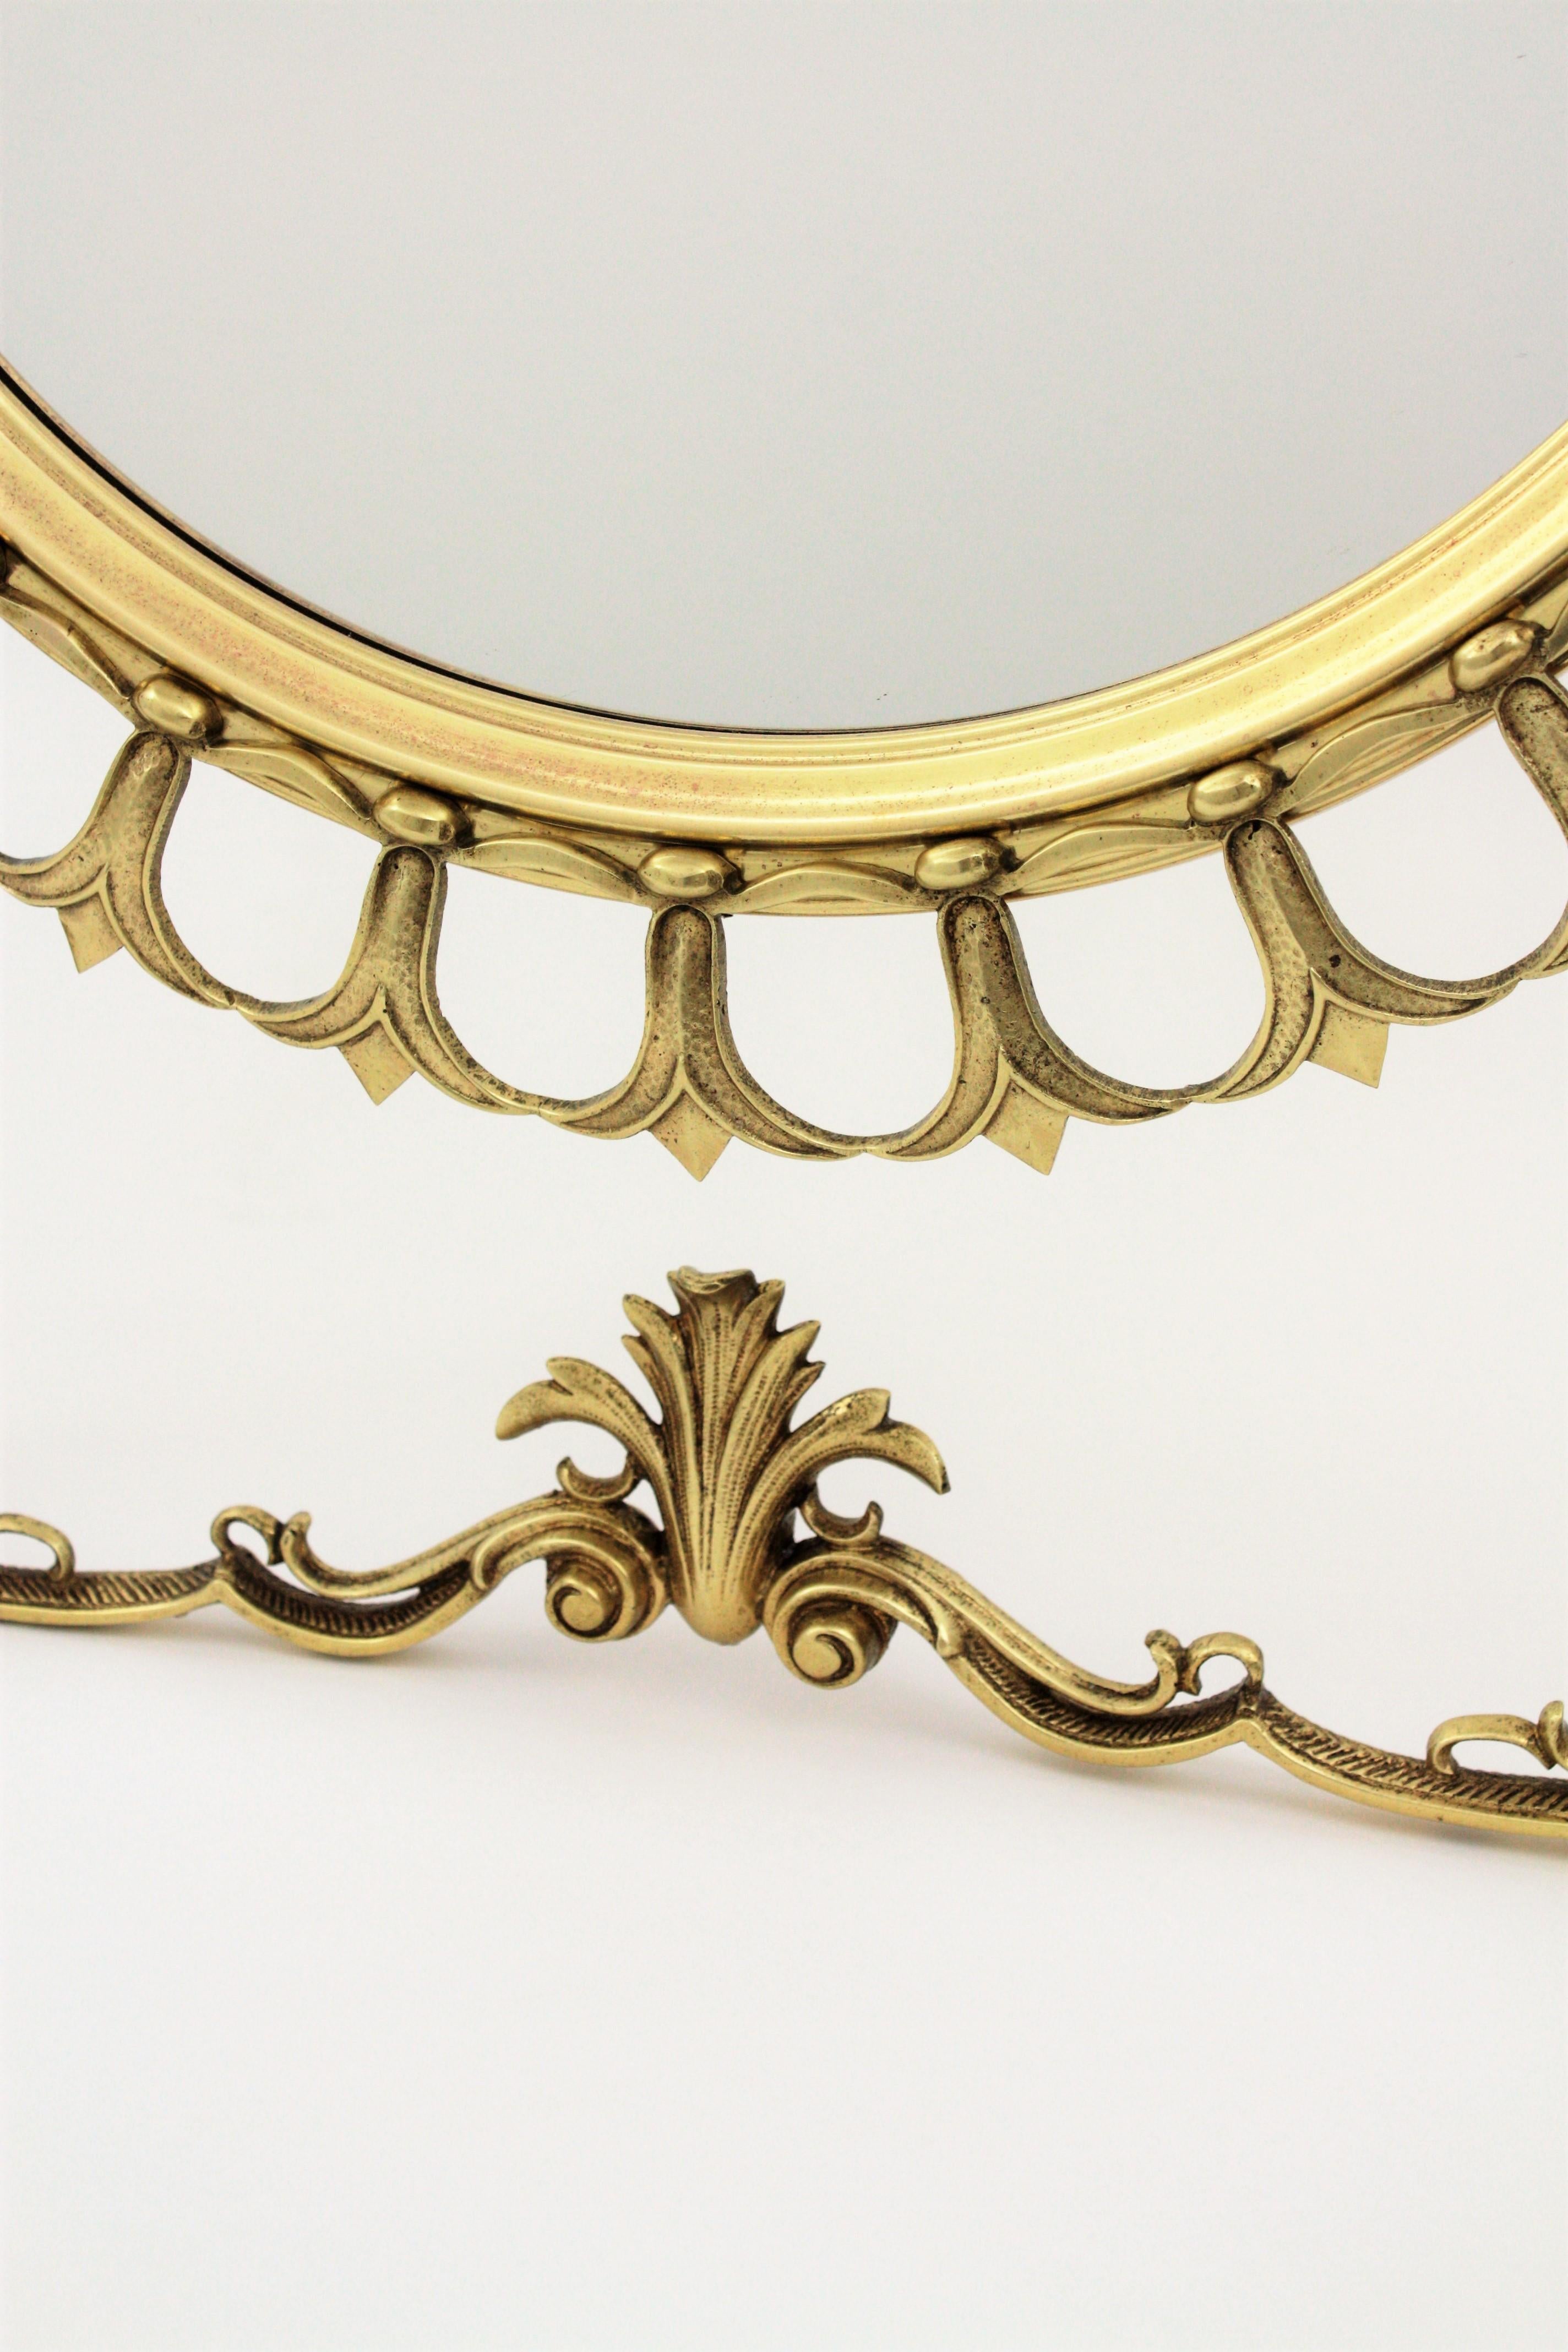 Mid-Century Modern Neoclassical Sunburst Vanity or Table Mirror in Brass For Sale